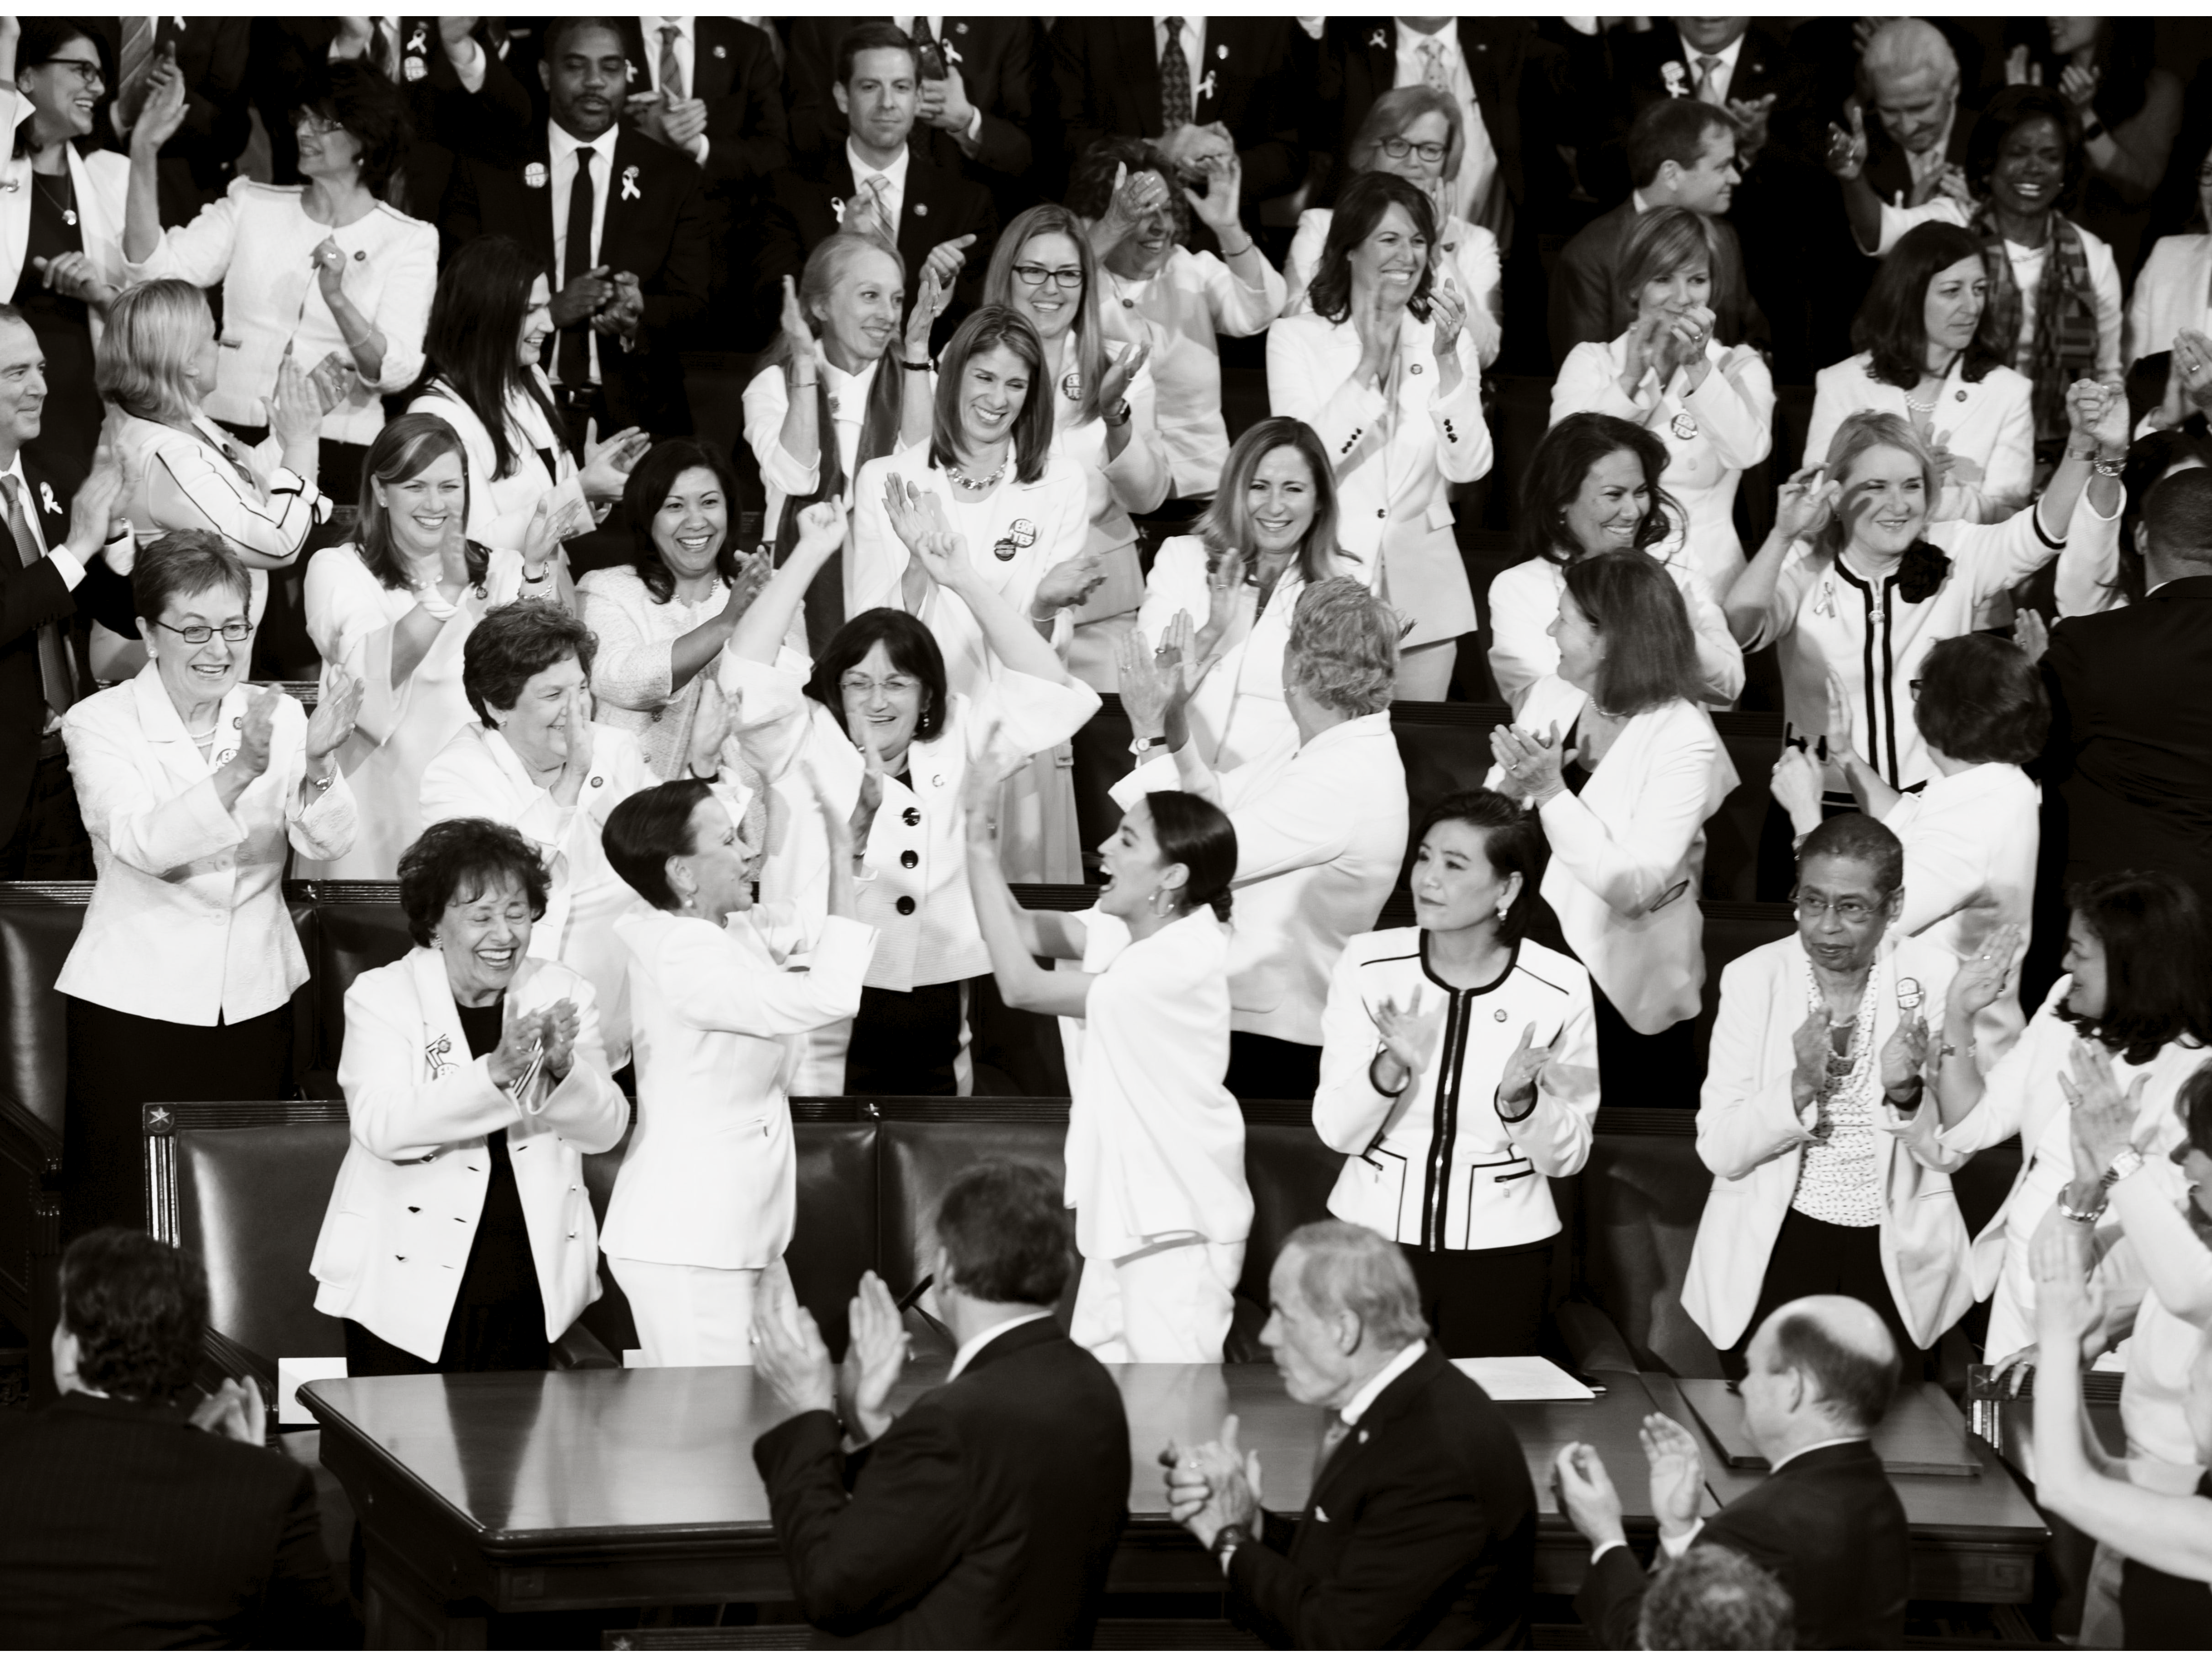 Members of the 116th Congress celebrate wearing all white in August of 2020, in honor of the women's suffrage movement that led to the ratification of the 19th Amendment in 1920.